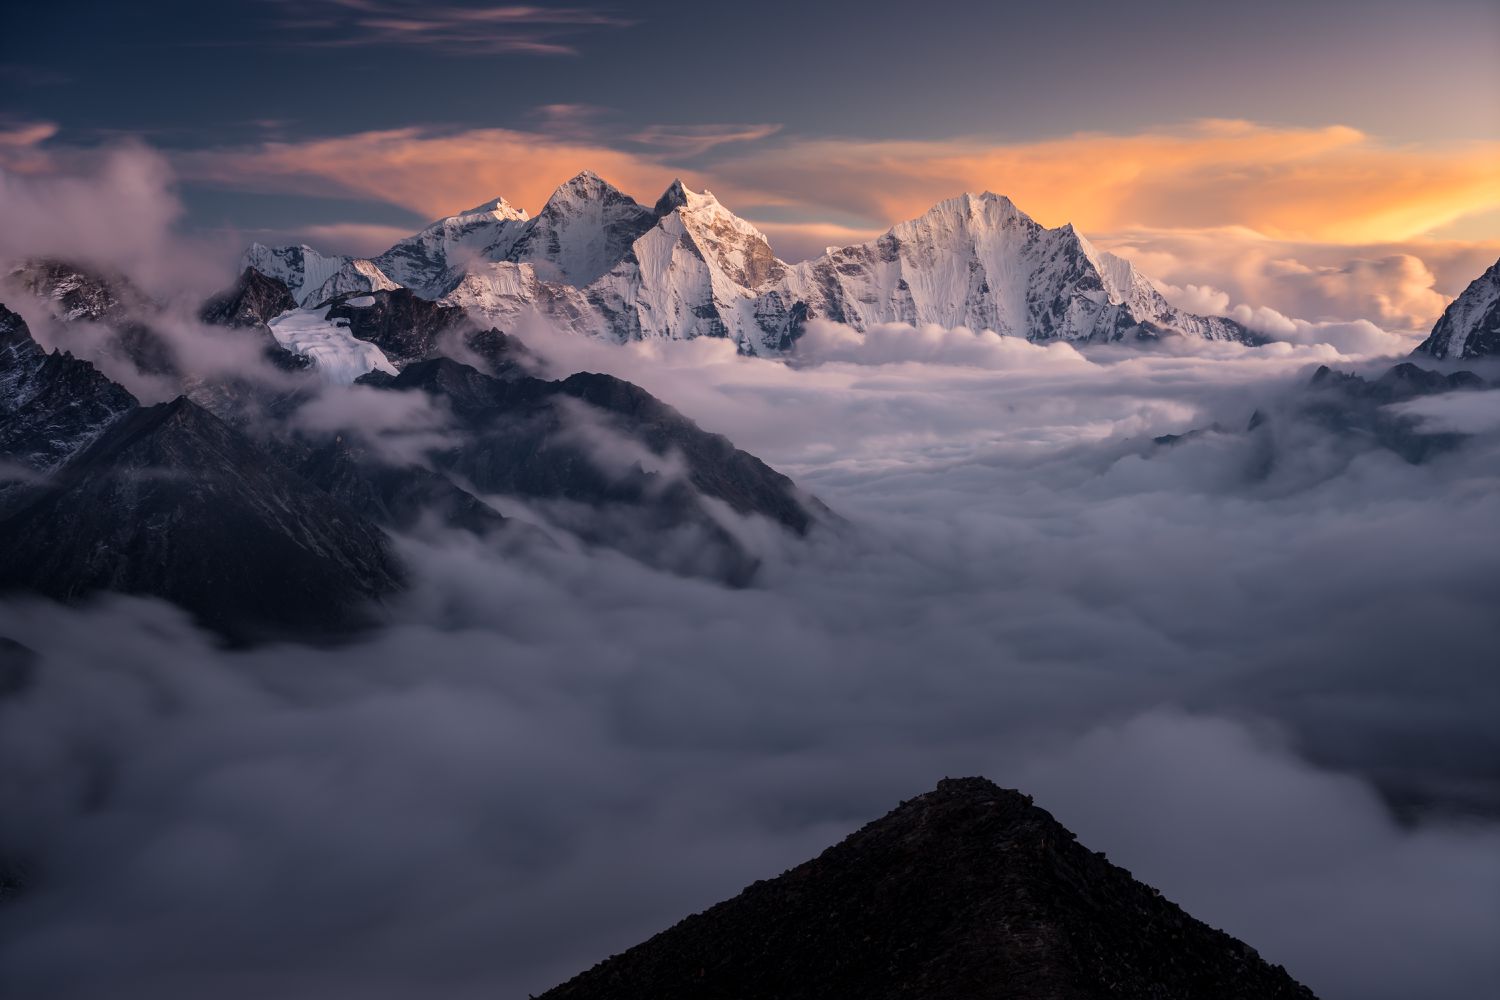 himalaya-mountains-landscape-from-kalapattar-view-point-at-sunset--everest-region--nepal-864223704-5c7374c546e0fb0001835dc3